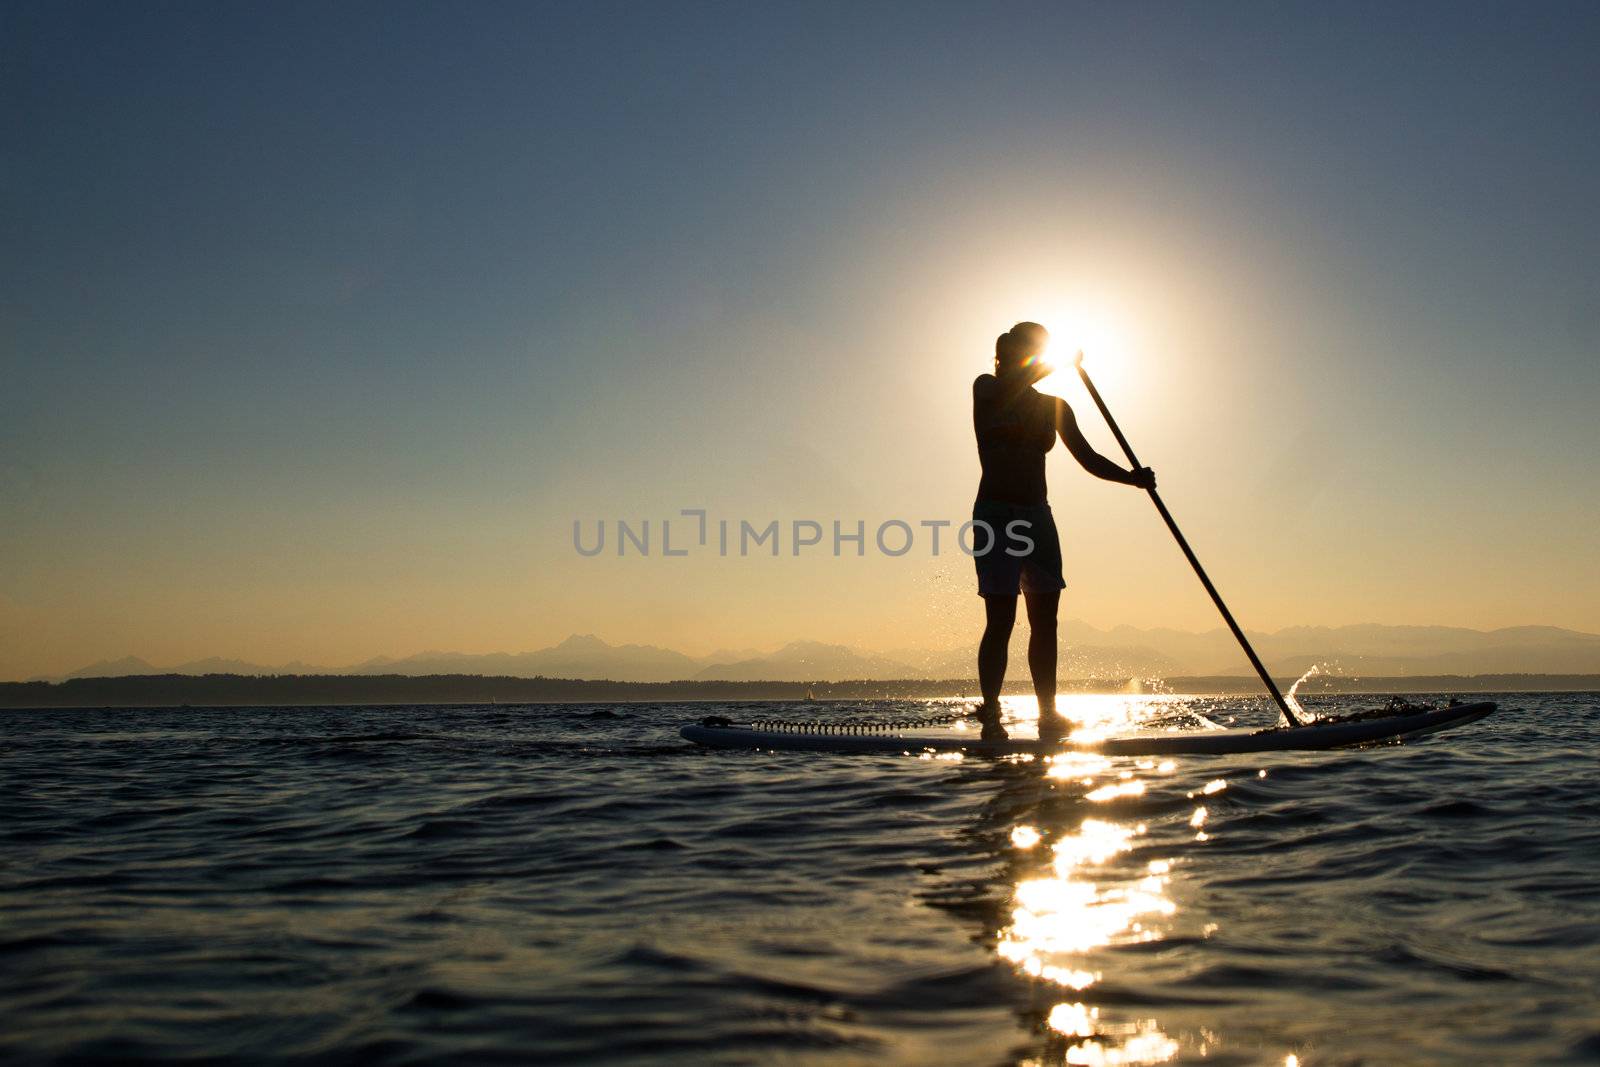 Woman paddling stand up paddle board at sunset with mountains in background.